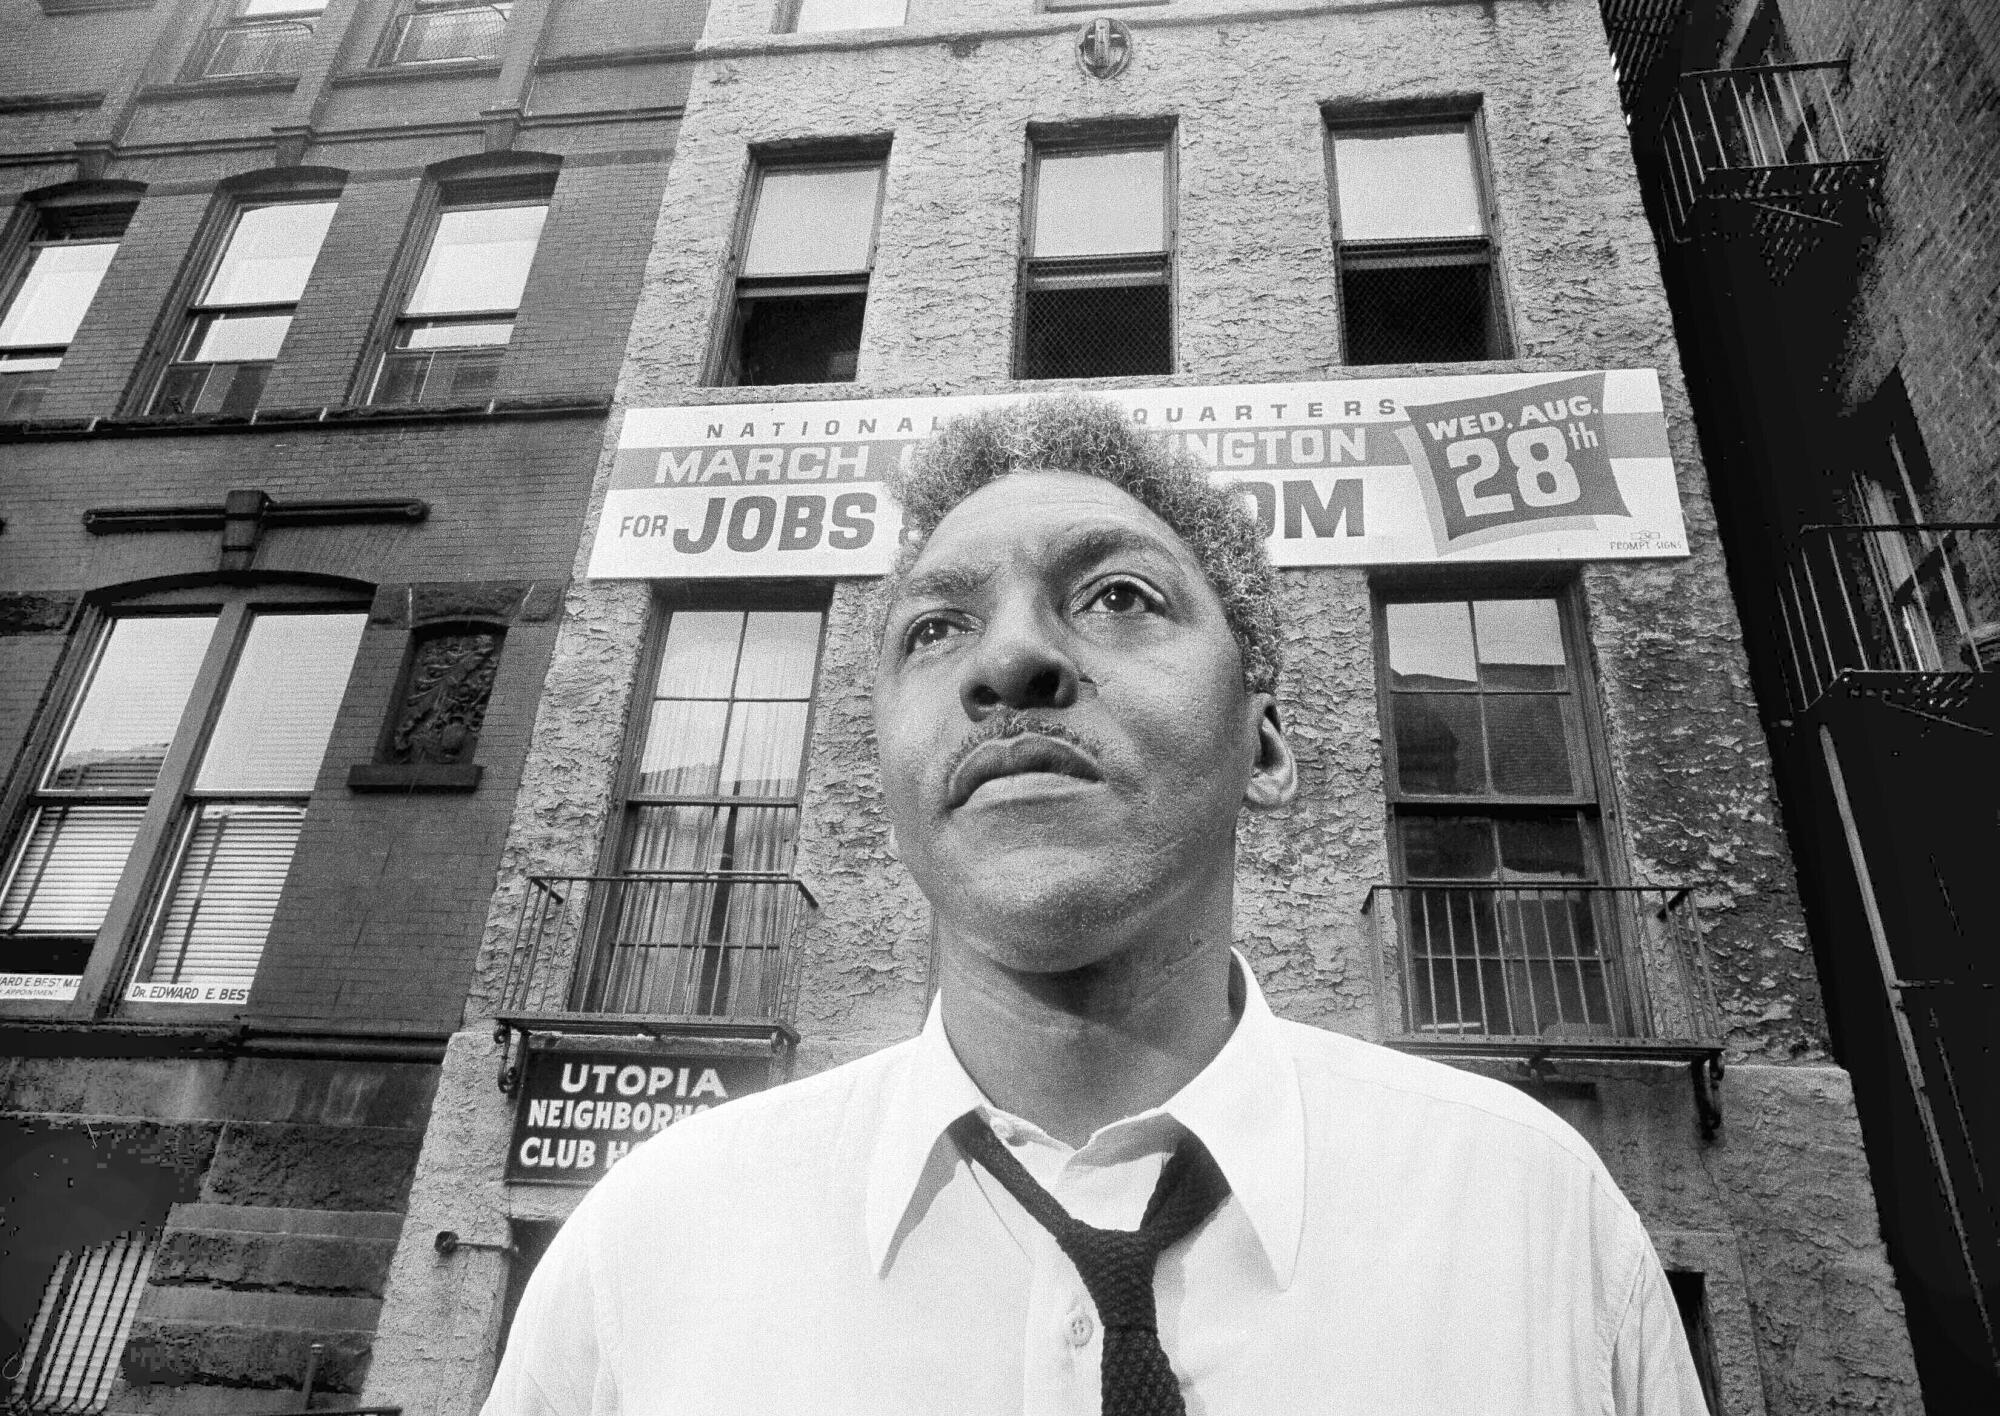 A head-and-shoulder photo of a Black man standing outside brick buildings